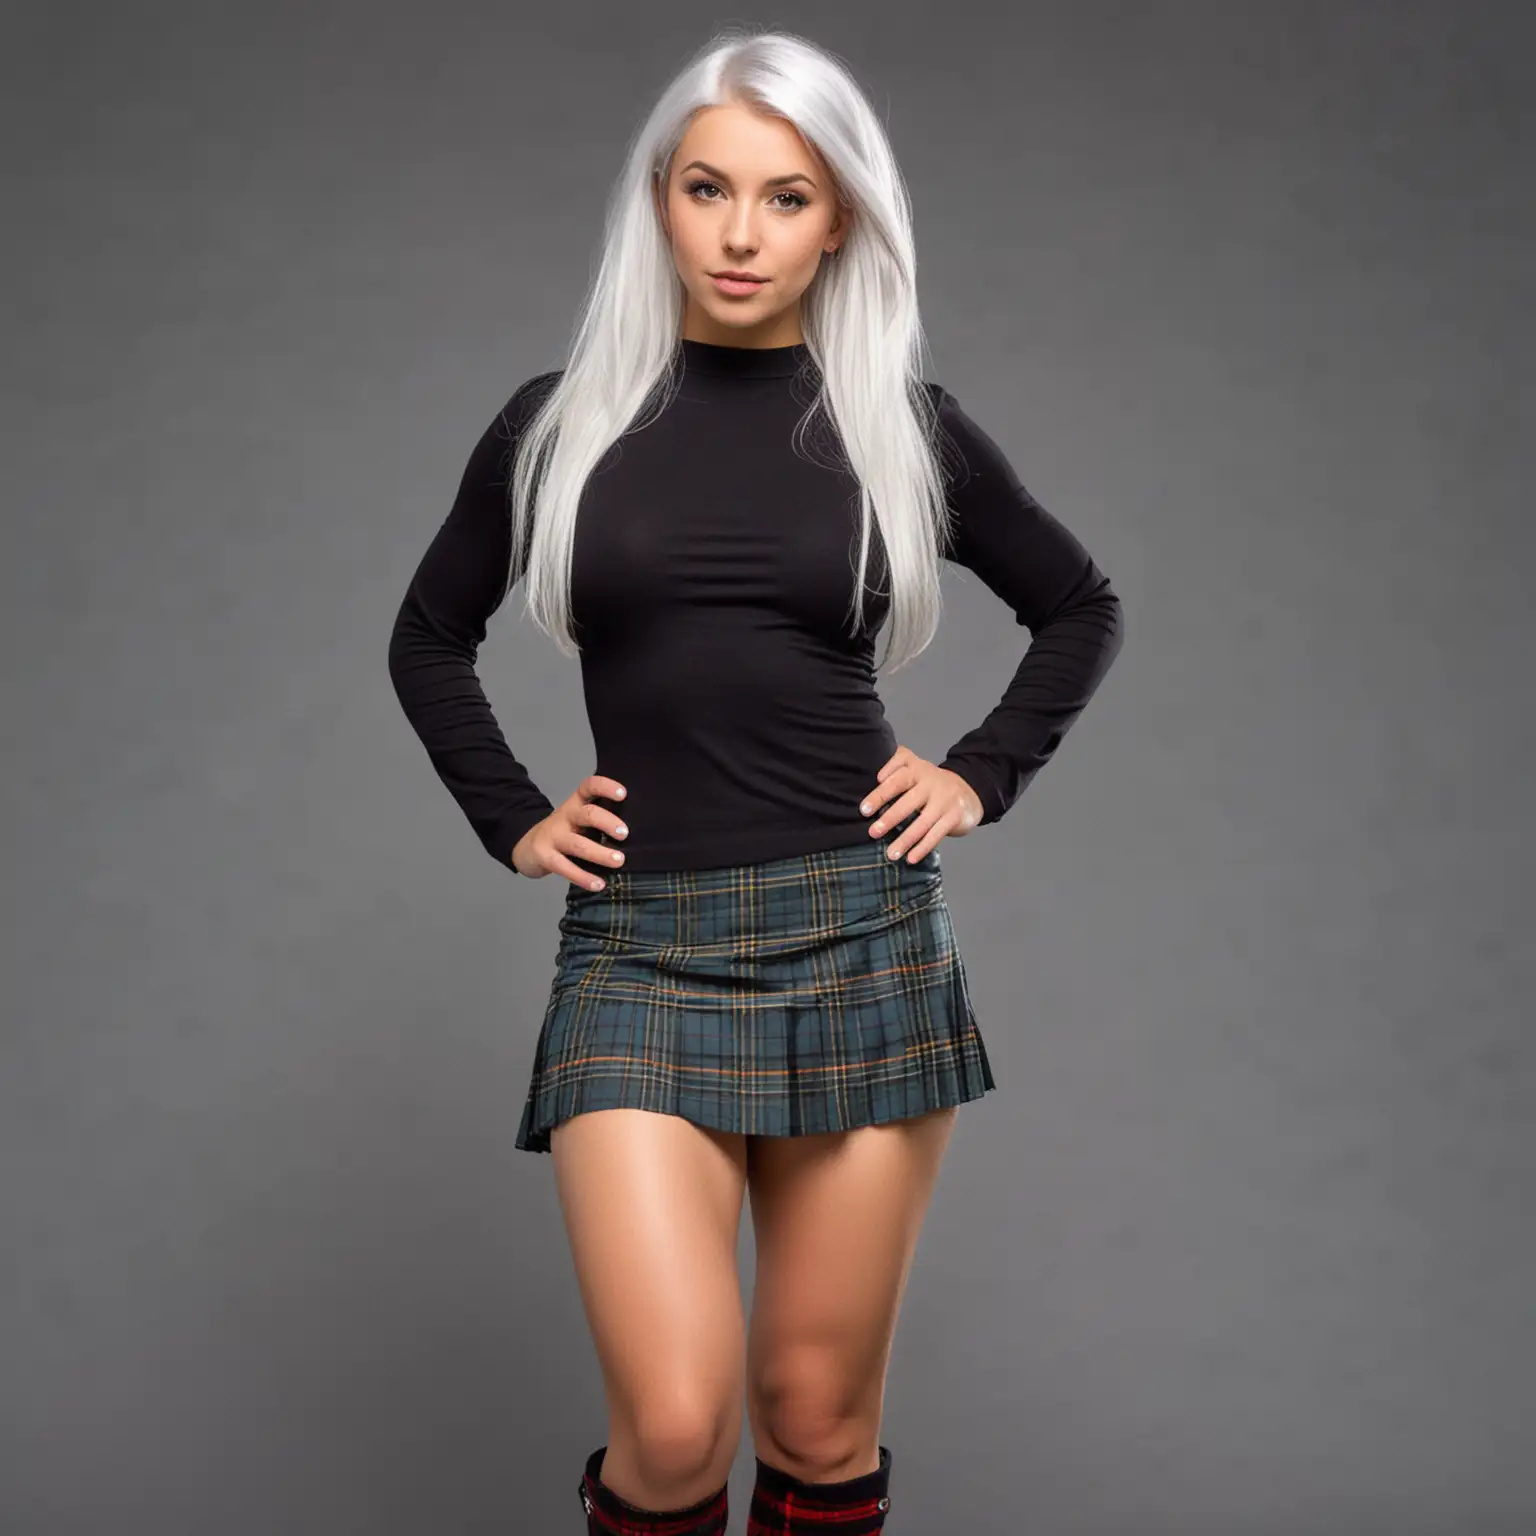 Sexy Petite woman  with wide hips and tiny boobs wearing a kilted miniskirt  and silvery hair